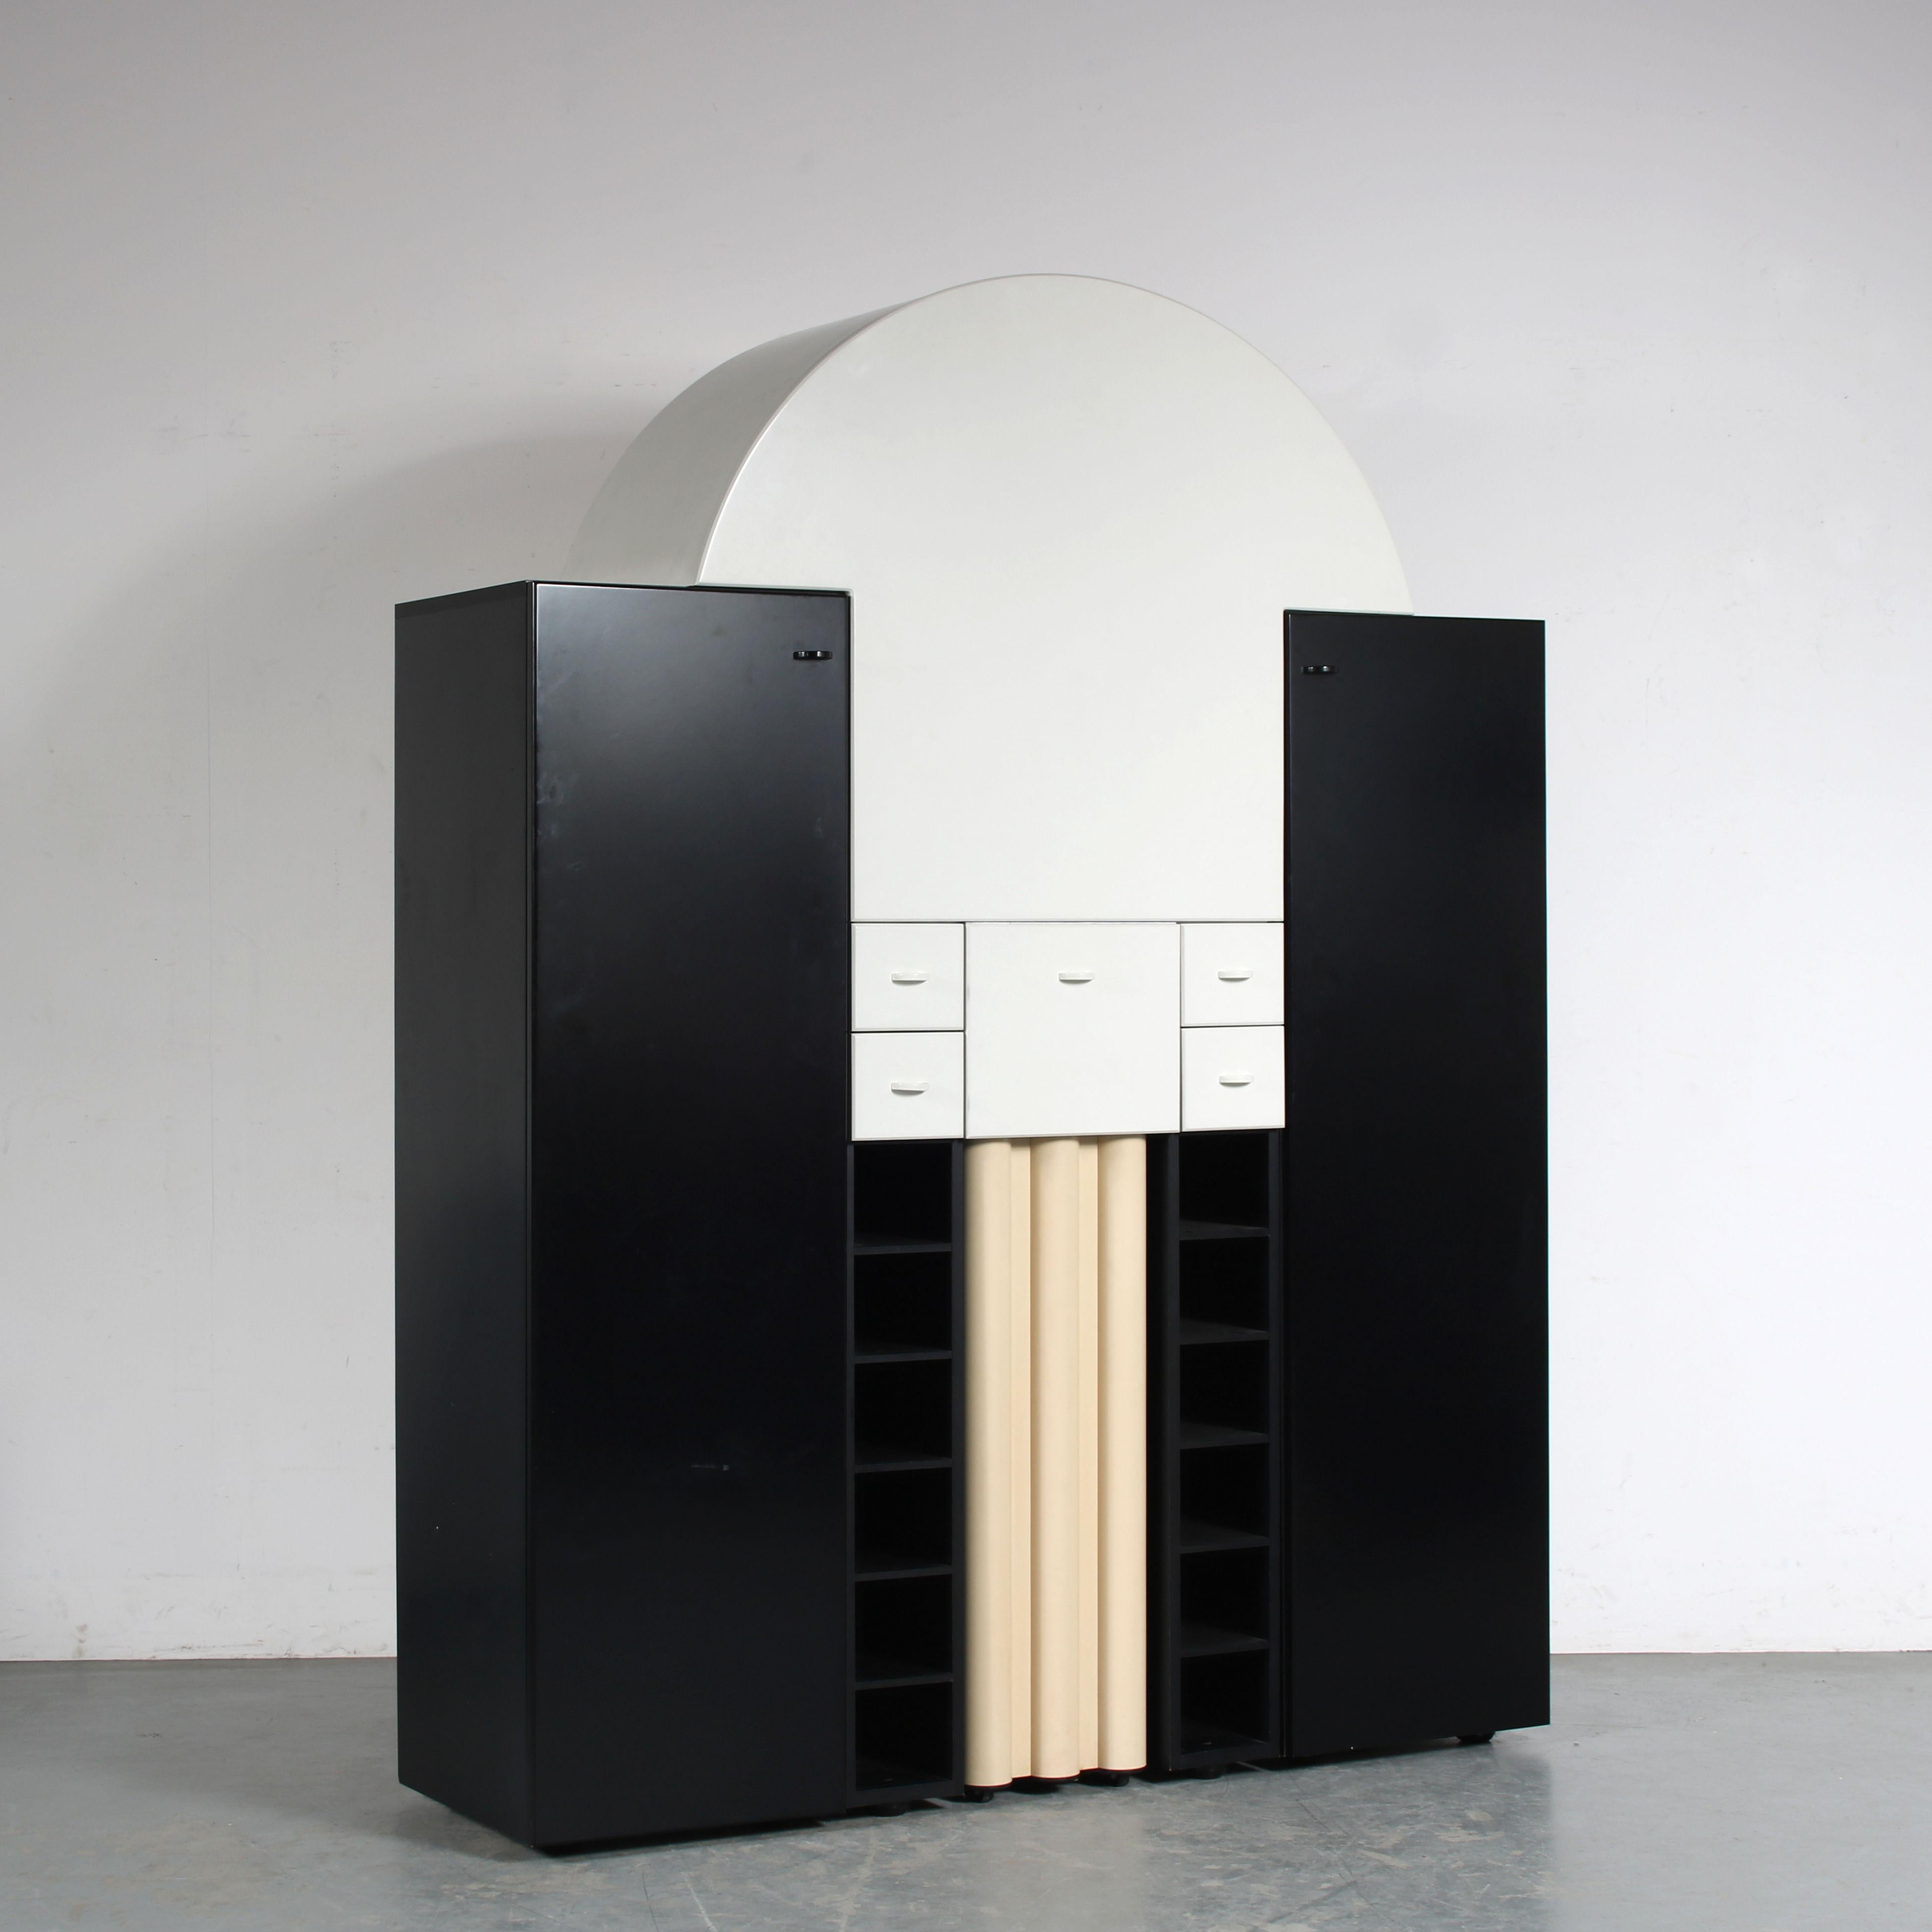 An eye-catching bar cabinet, model “Duo”, designed by Peter Maly and manufactured by Interlübke in Germany around 1980.

This piece has a unique, post modern style that combines round and square shapes in contrasting black and white laminated wood.